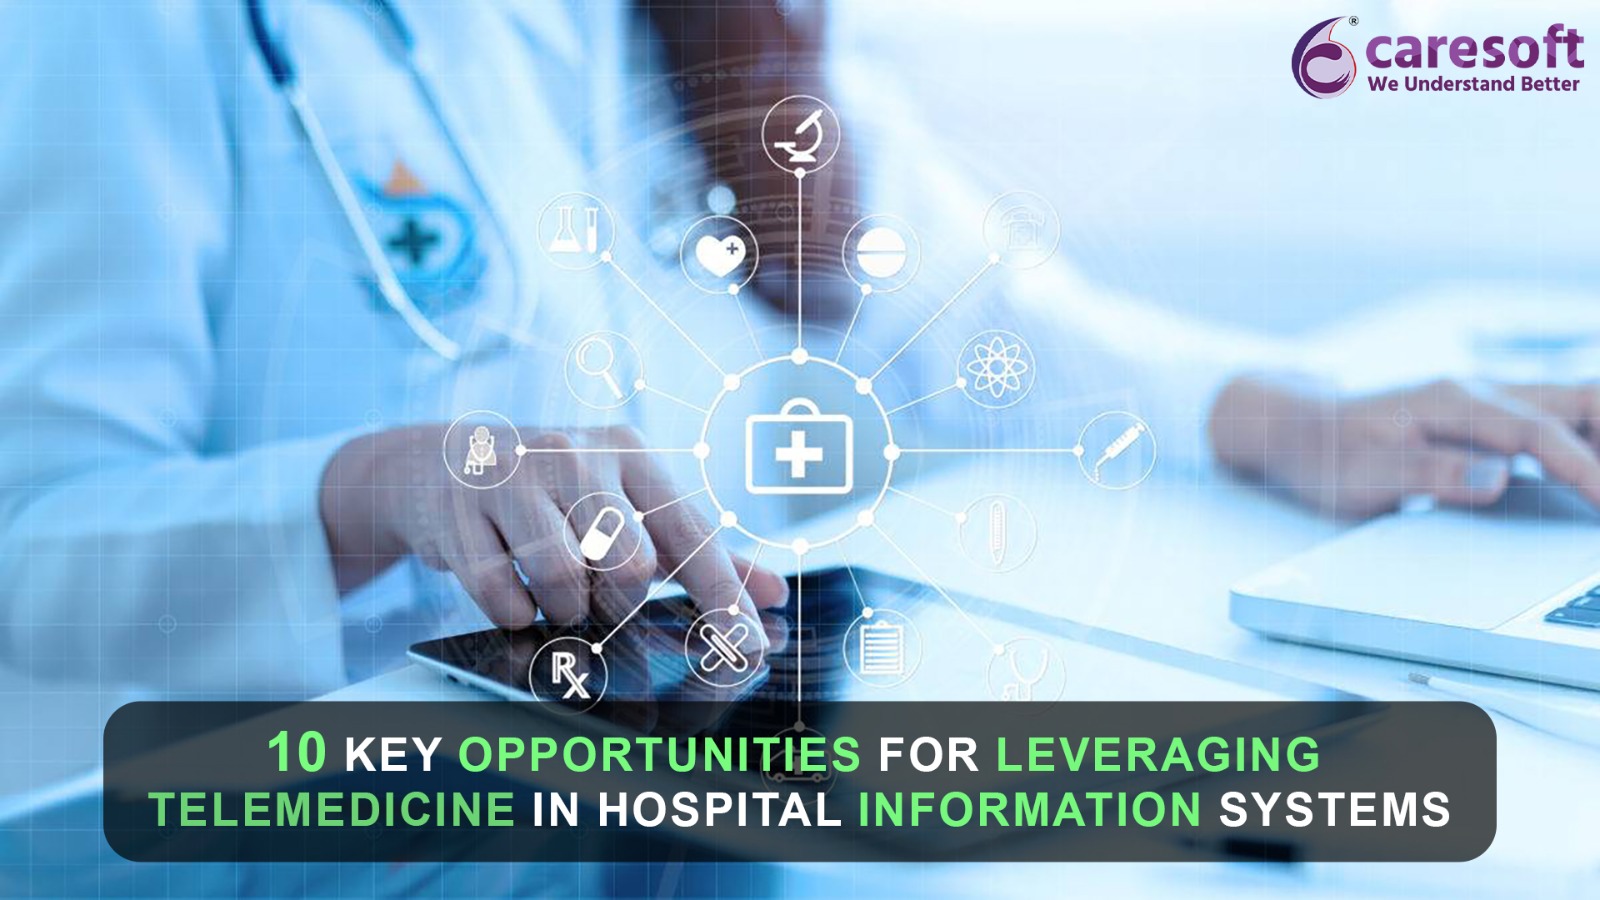 Challenges and Opportunities in Implementing Telemedicine in Hospital Information Systems